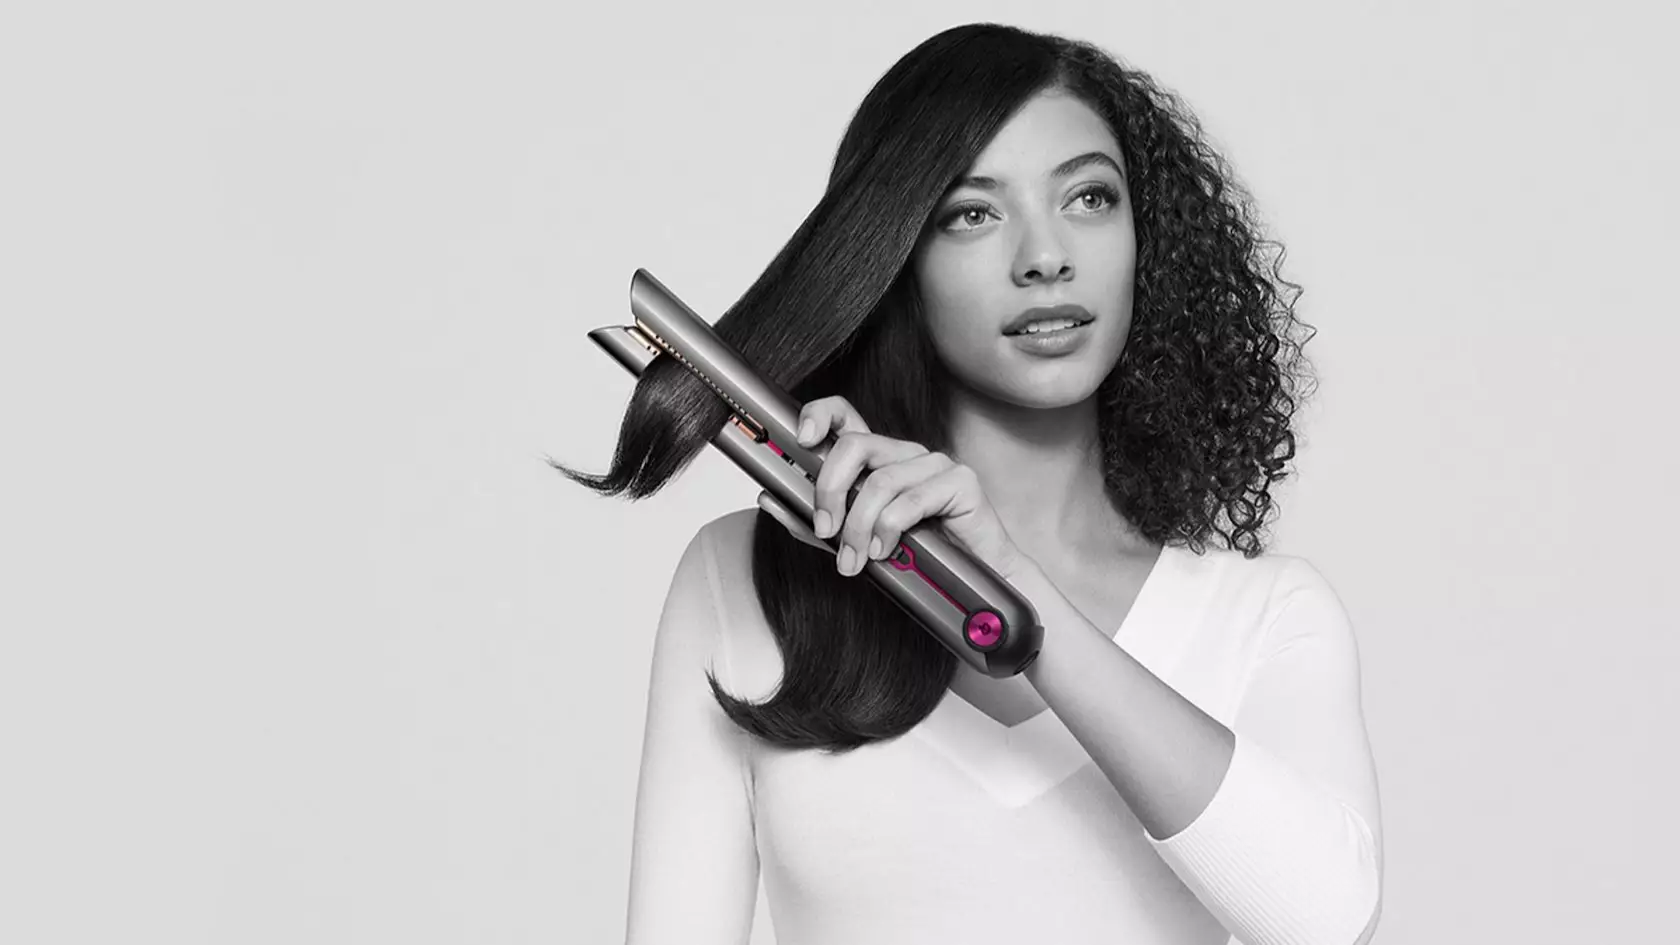 People Are Saying The New Dyson Straighteners Are 'Mind-Blowing'